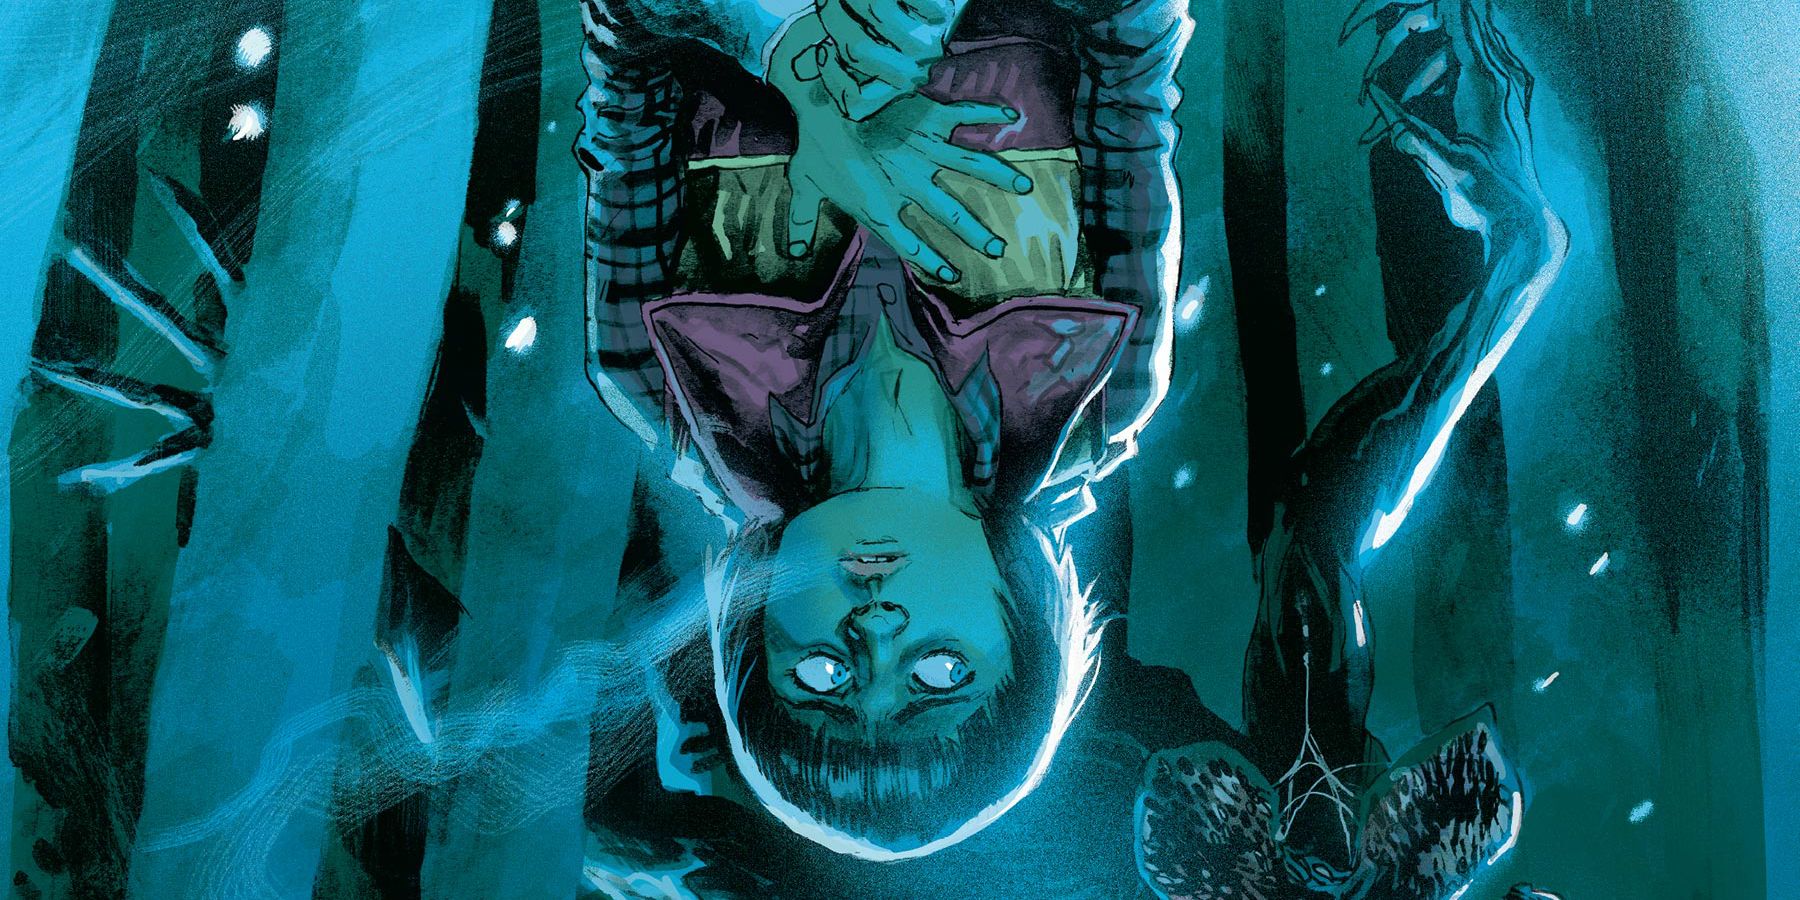 Will Byers hanging upside down in a Stranger Things comic book